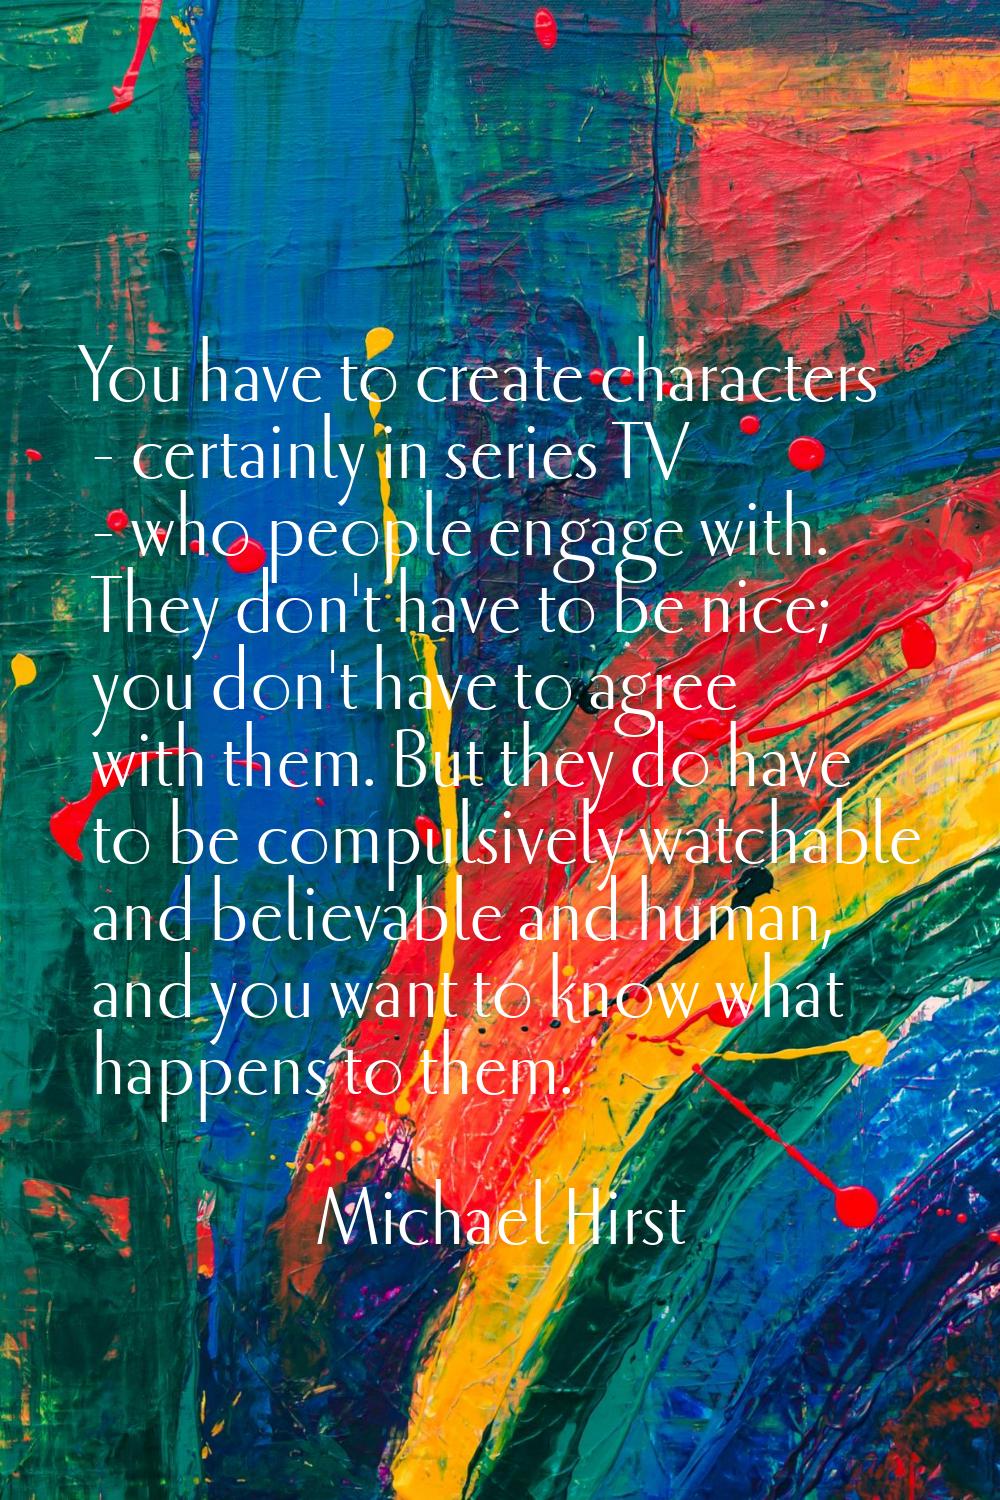 You have to create characters - certainly in series TV - who people engage with. They don't have to